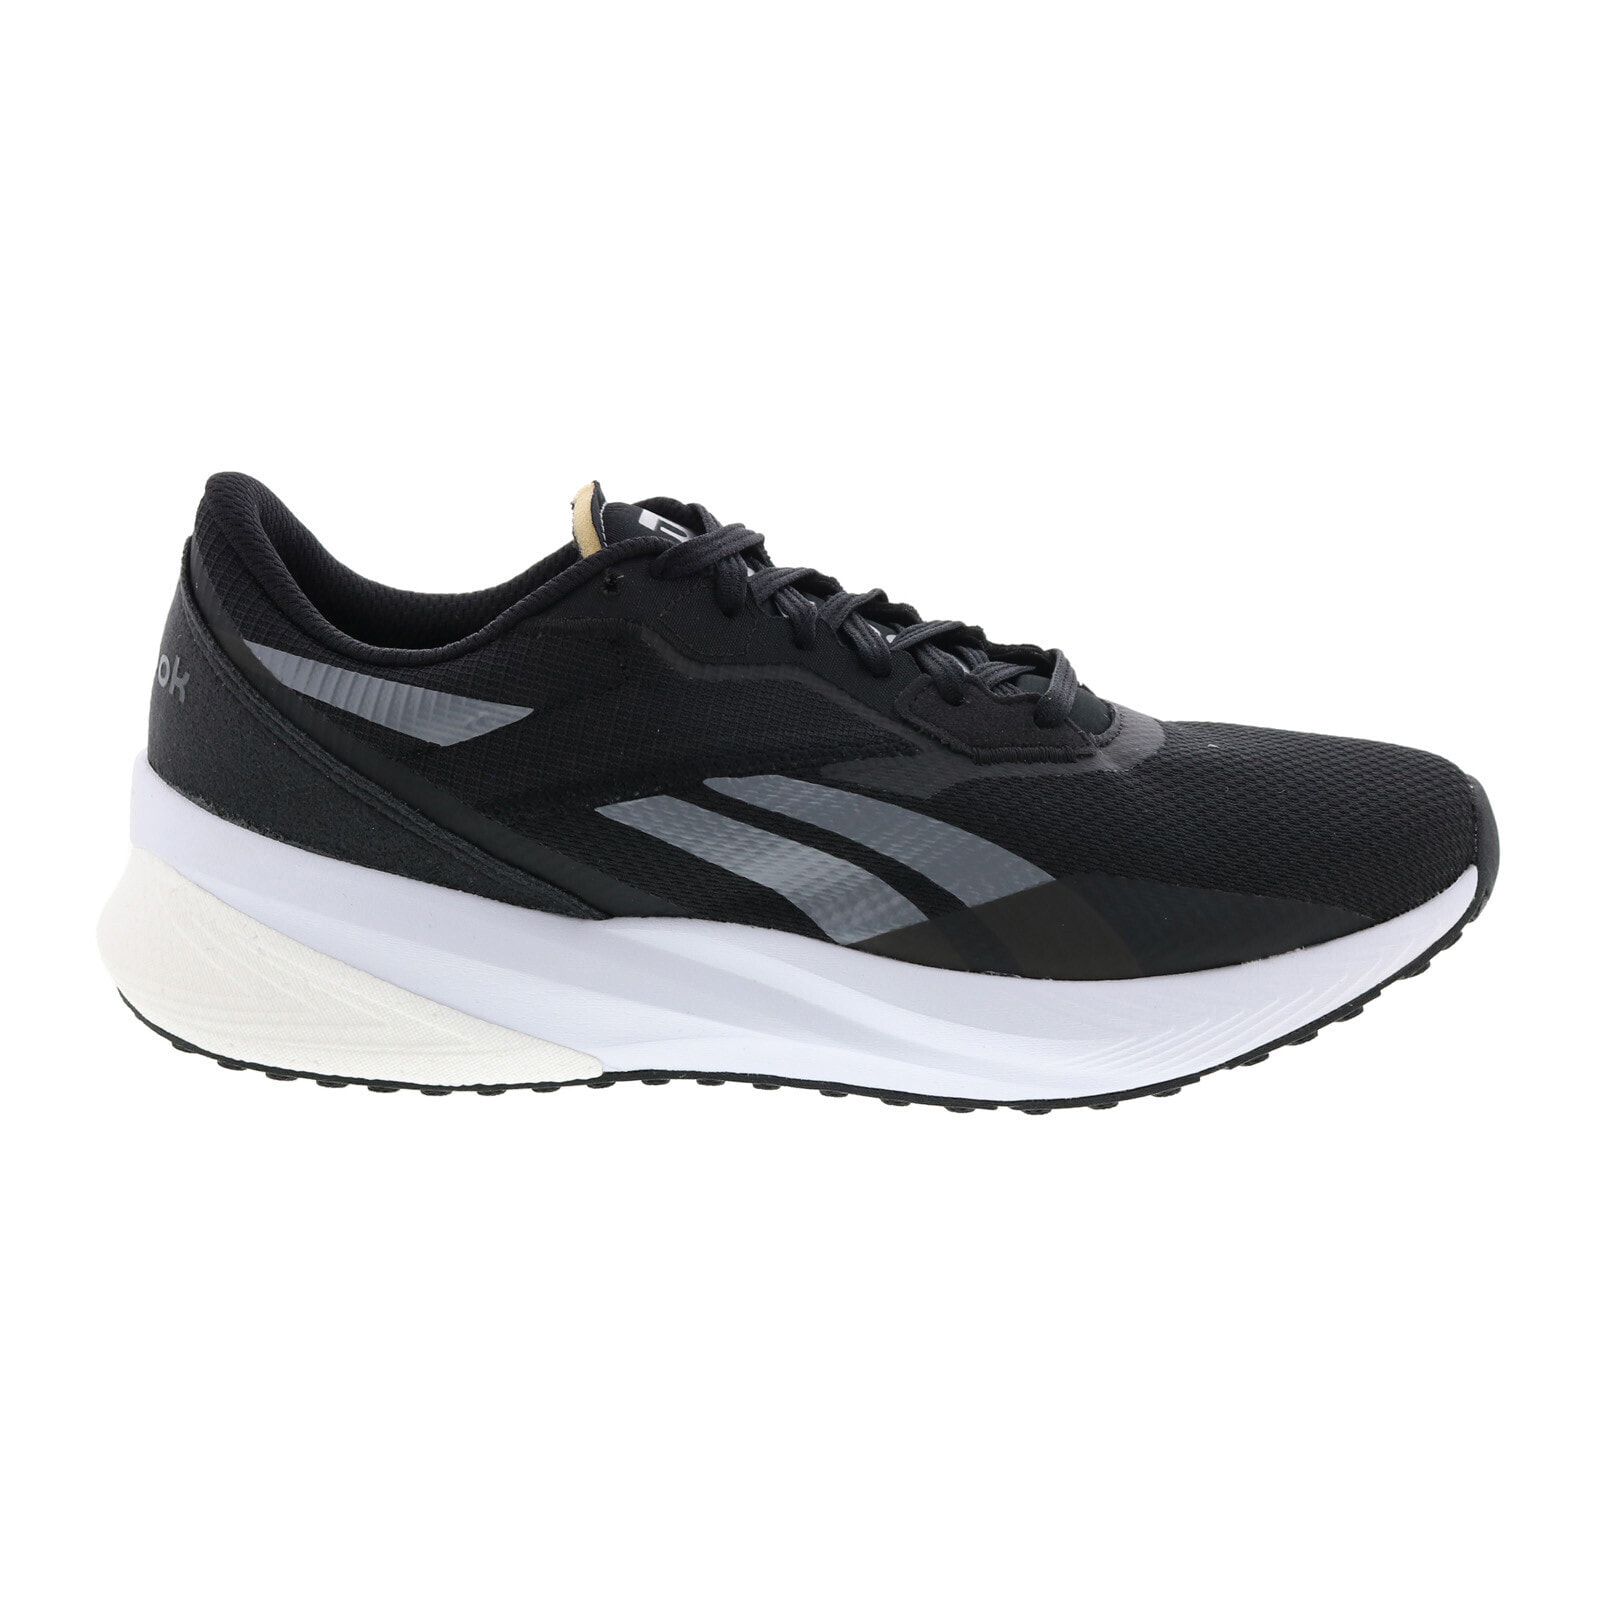 Reebok Floatride Energy Daily G58676 Mens Black Canvas Athletic Running Shoes